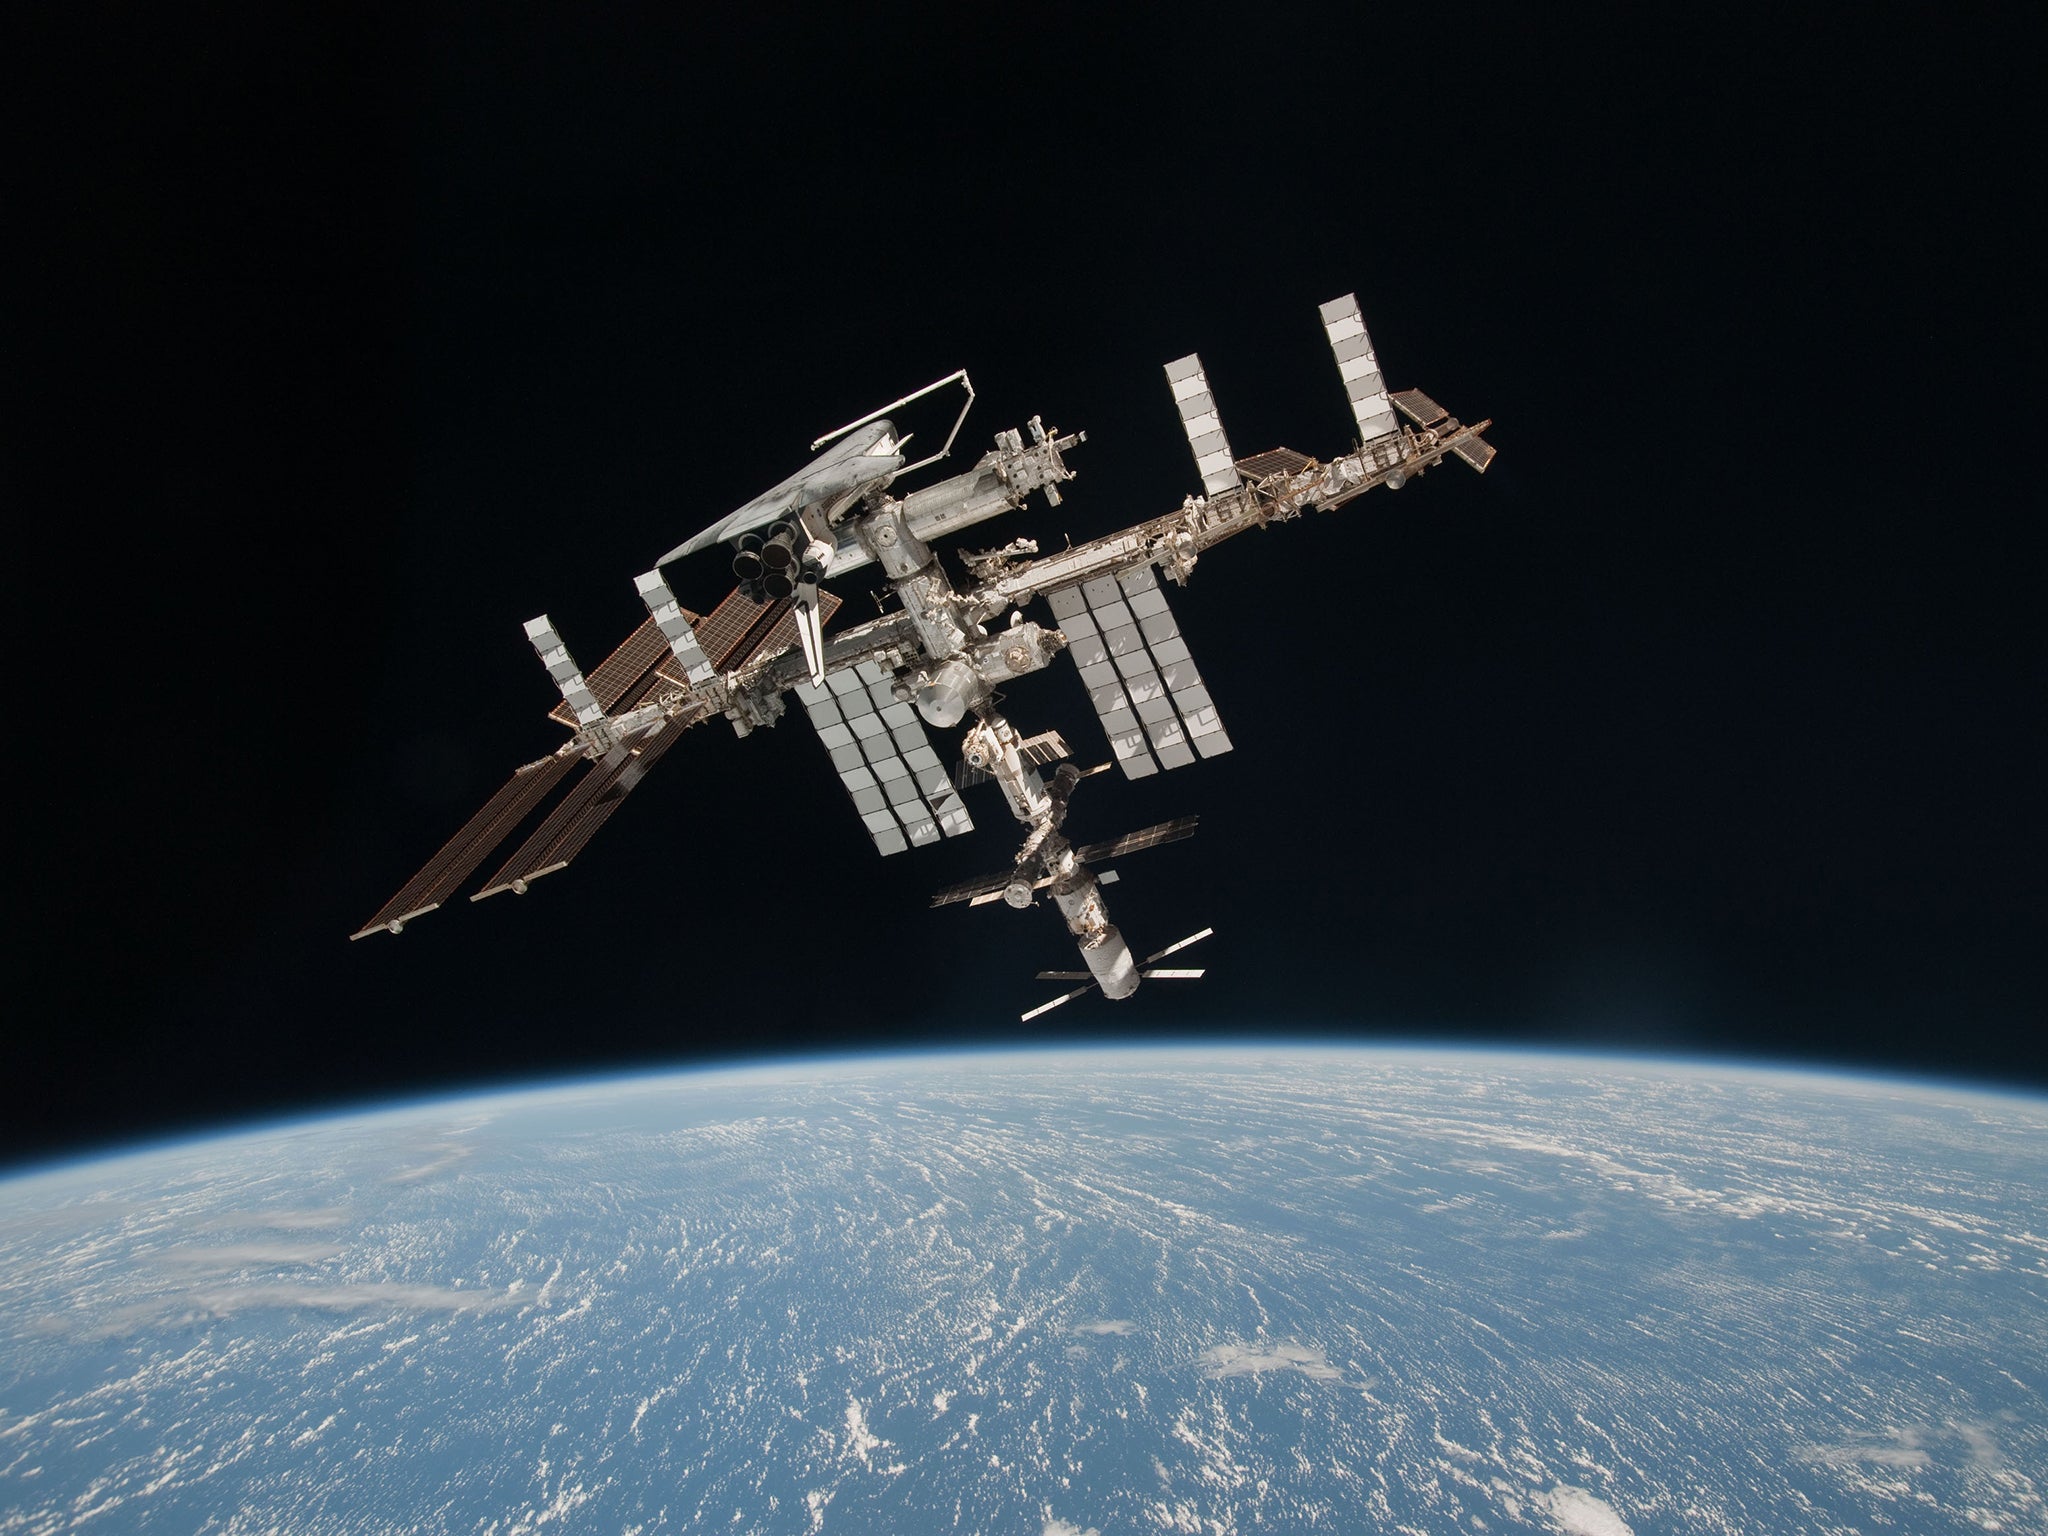 The ISS provides an ideal platform for science in space